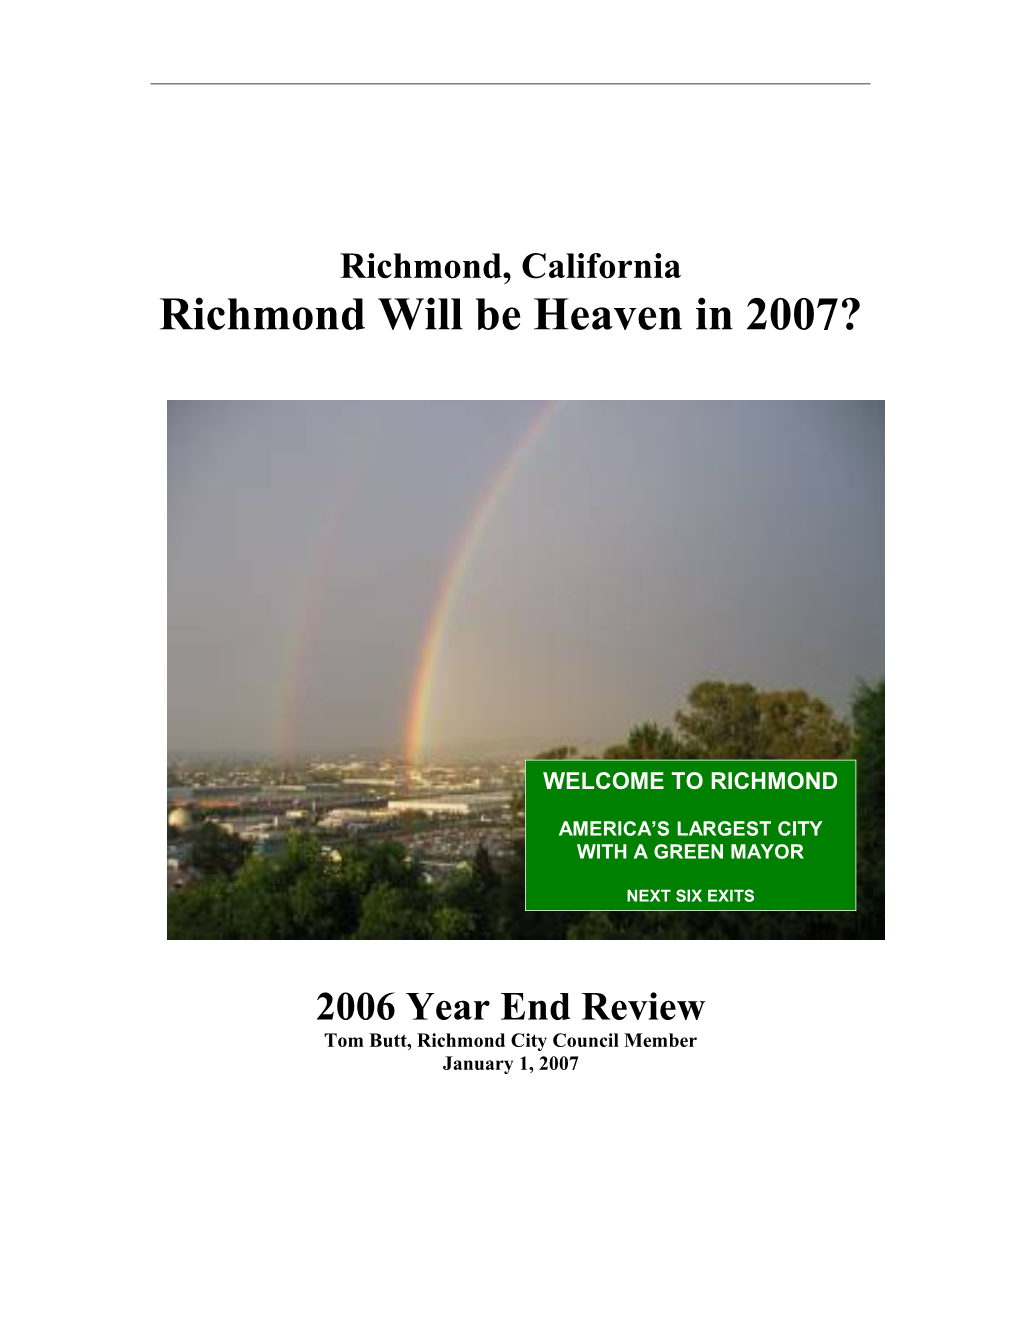 For Several Years, I Have Prepared Detailed Evaluations of City of Richmond Services, Problems